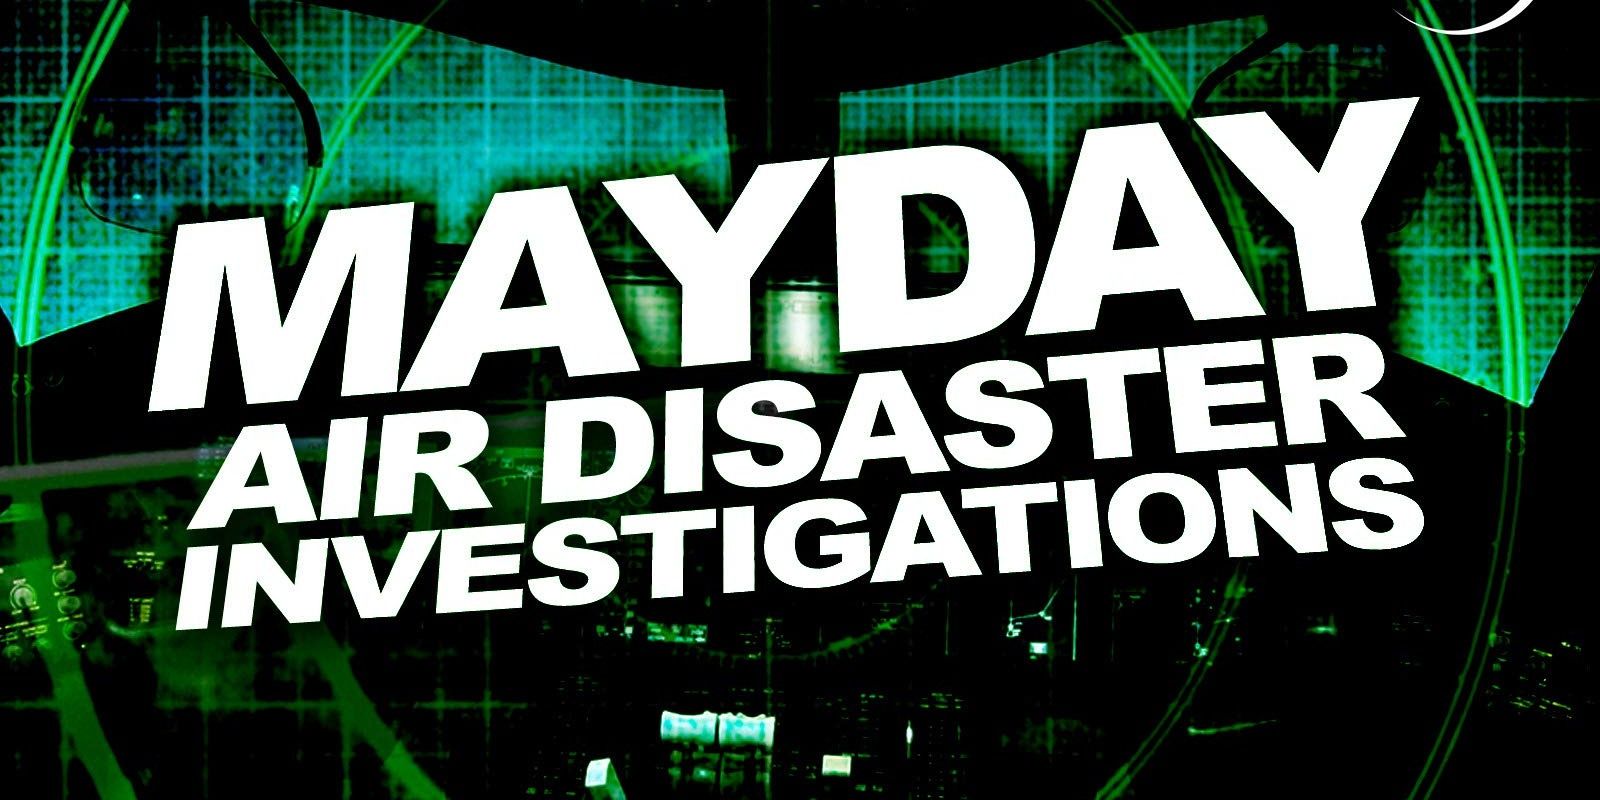 The title for Air Crash Investigations, also known as Mayday: Air Disaster Investigations, is digitally placed over a radar screen